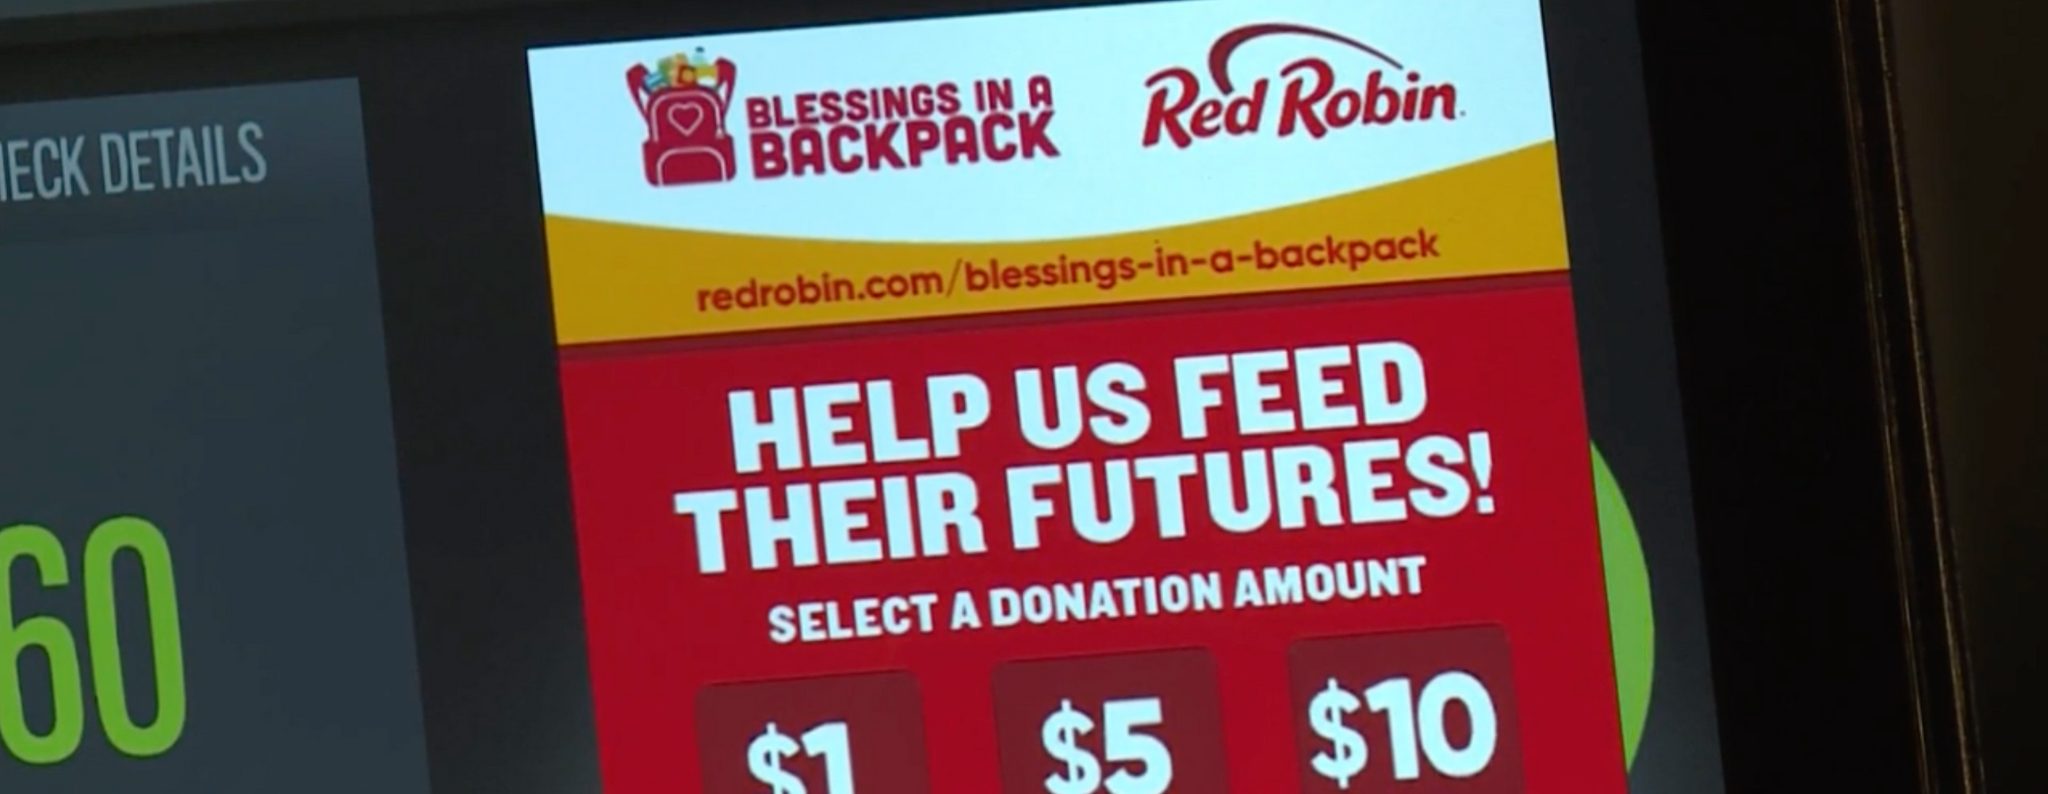 Red Robin Fundraiser Aims To End Child Hunger in Oregon